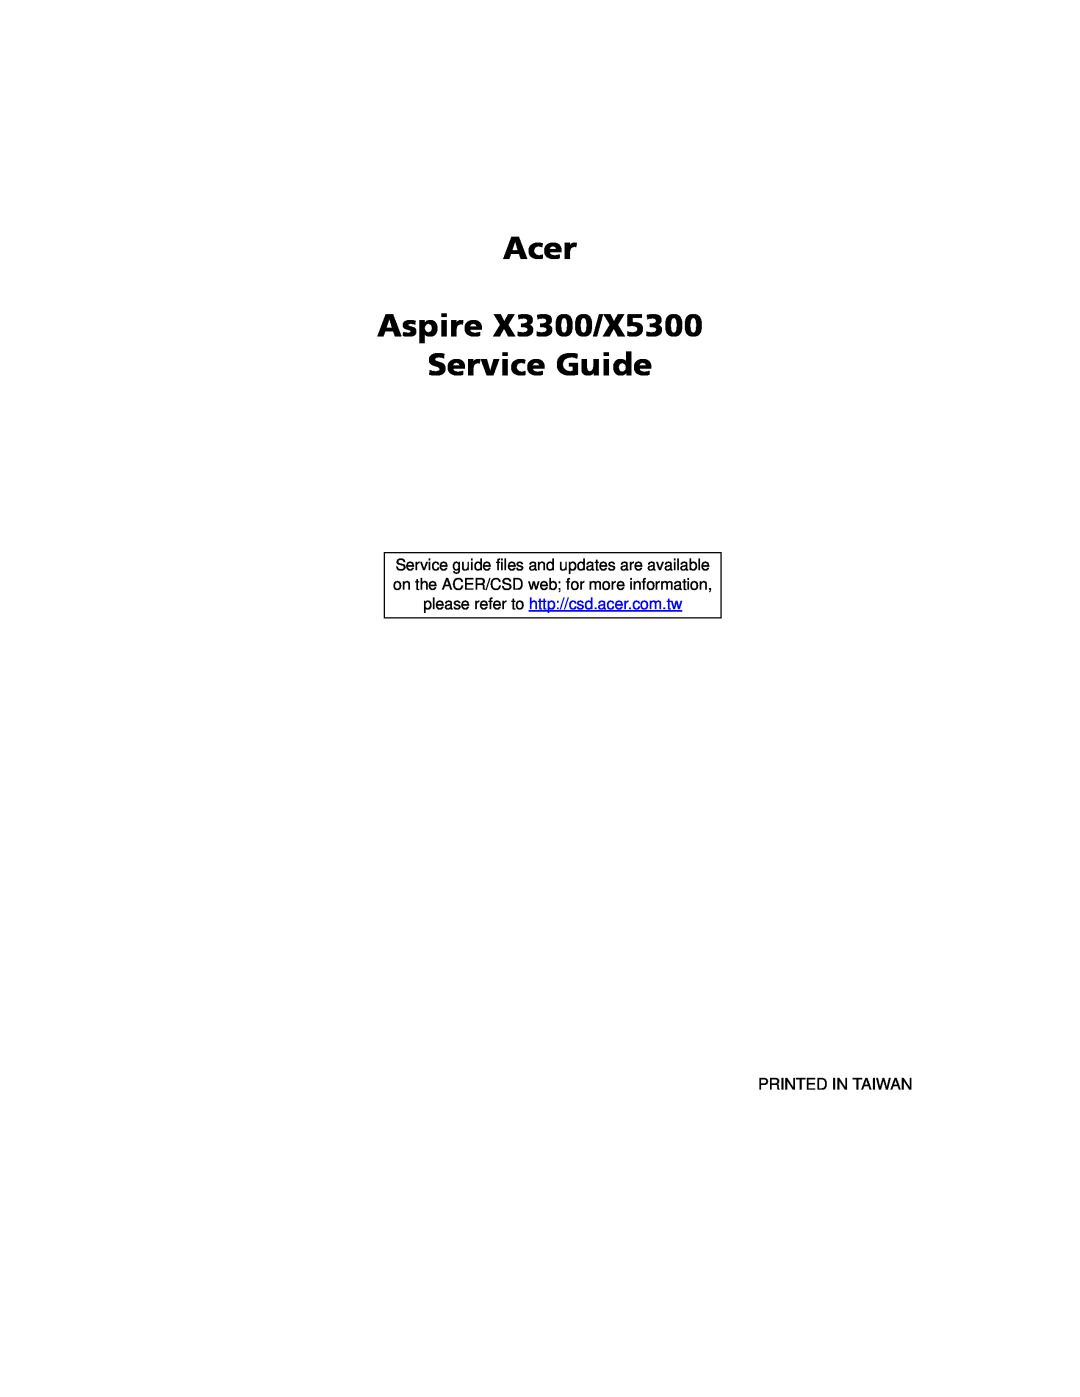 Acer manual Acer Aspire X3300/X5300 Service Guide, Printed In Taiwan 